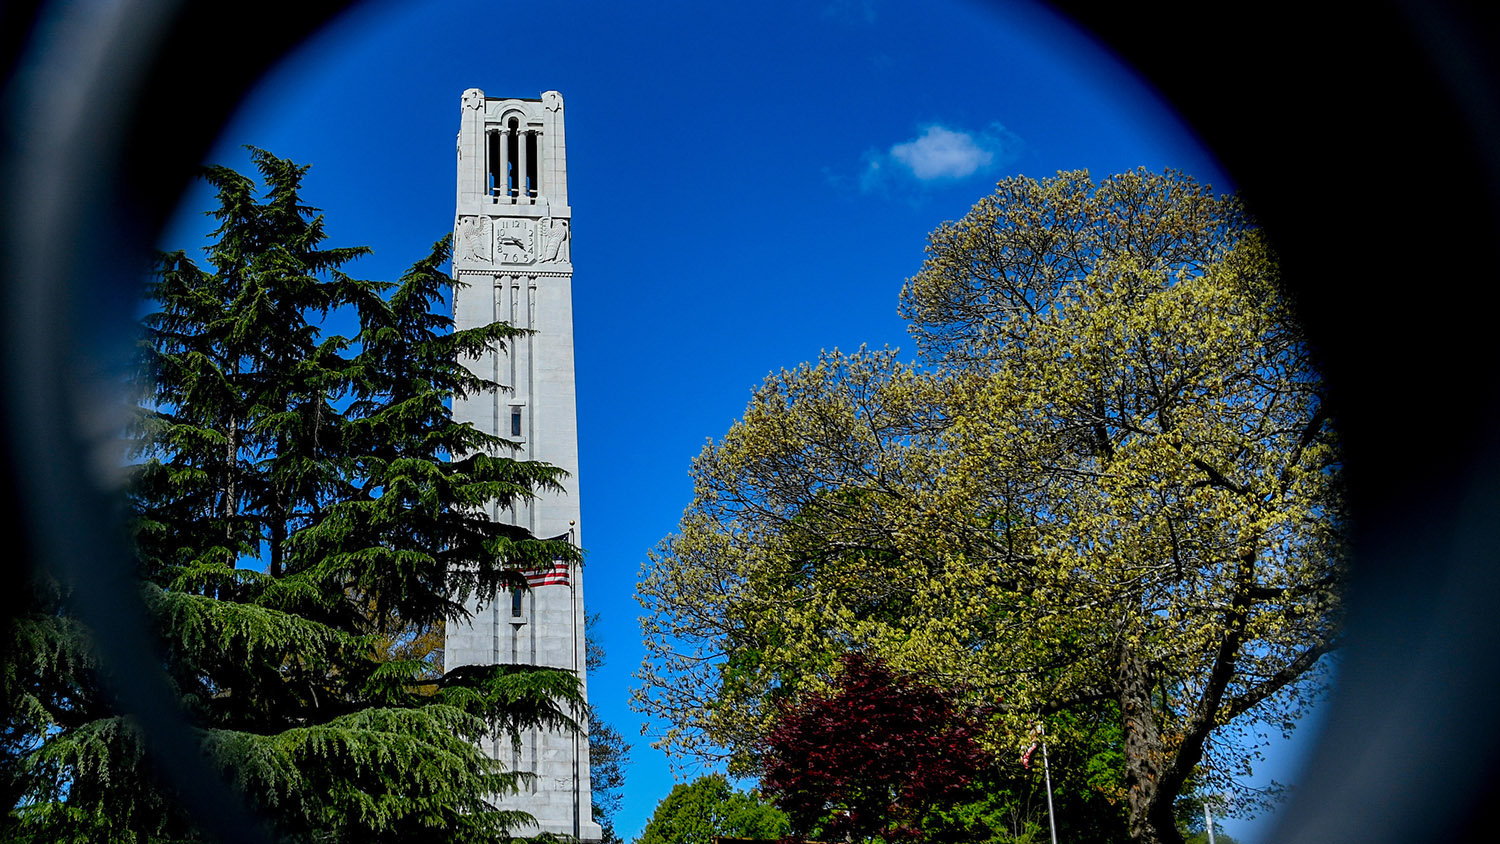 The Belltower, framed by the gate at the edge of campus.